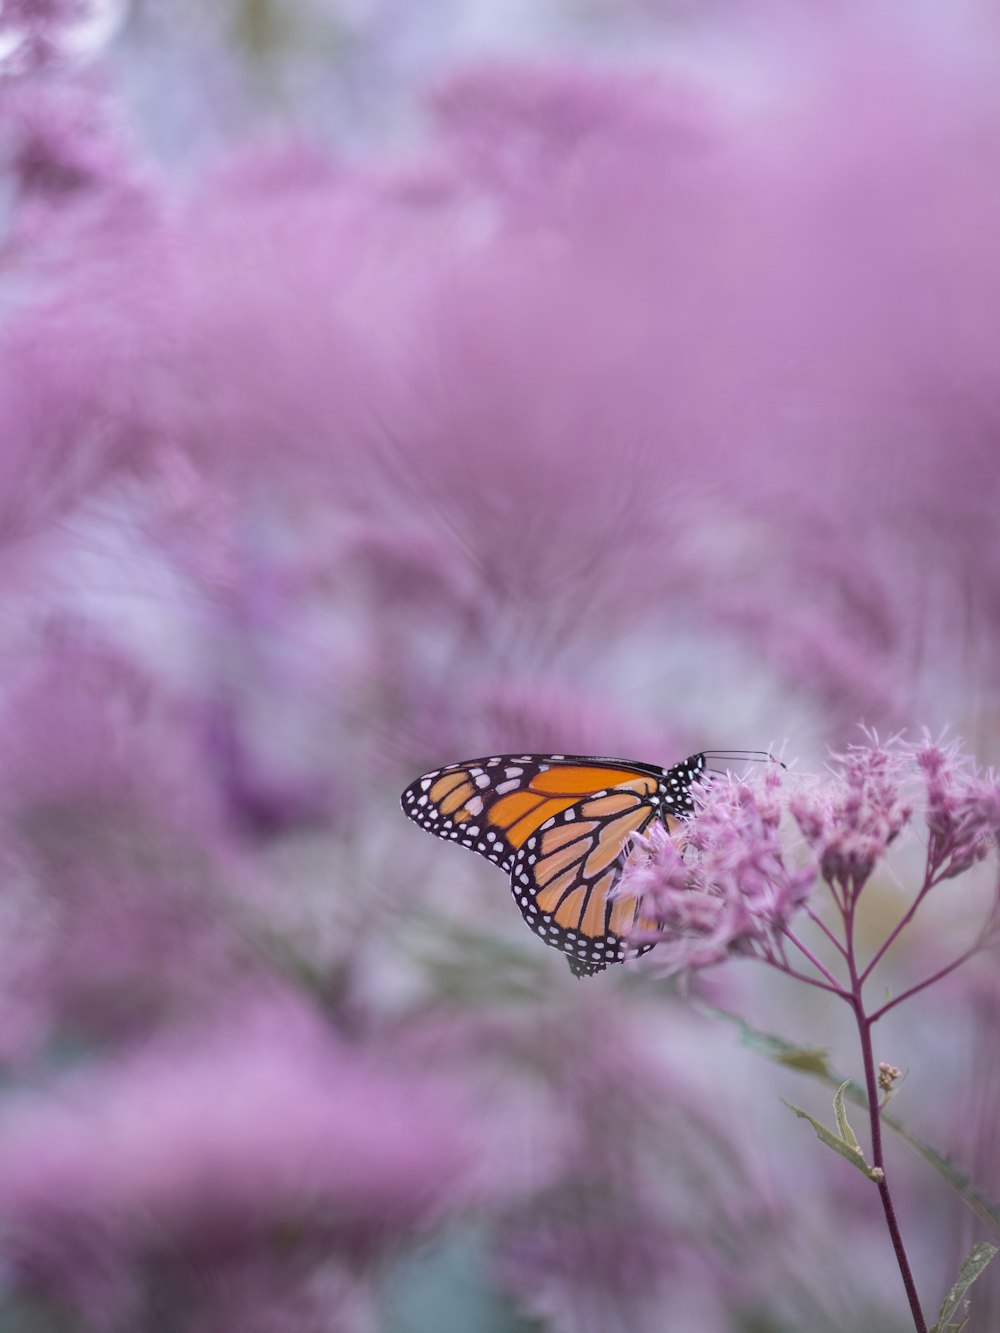 brown and white butterfly on purple petaled flower